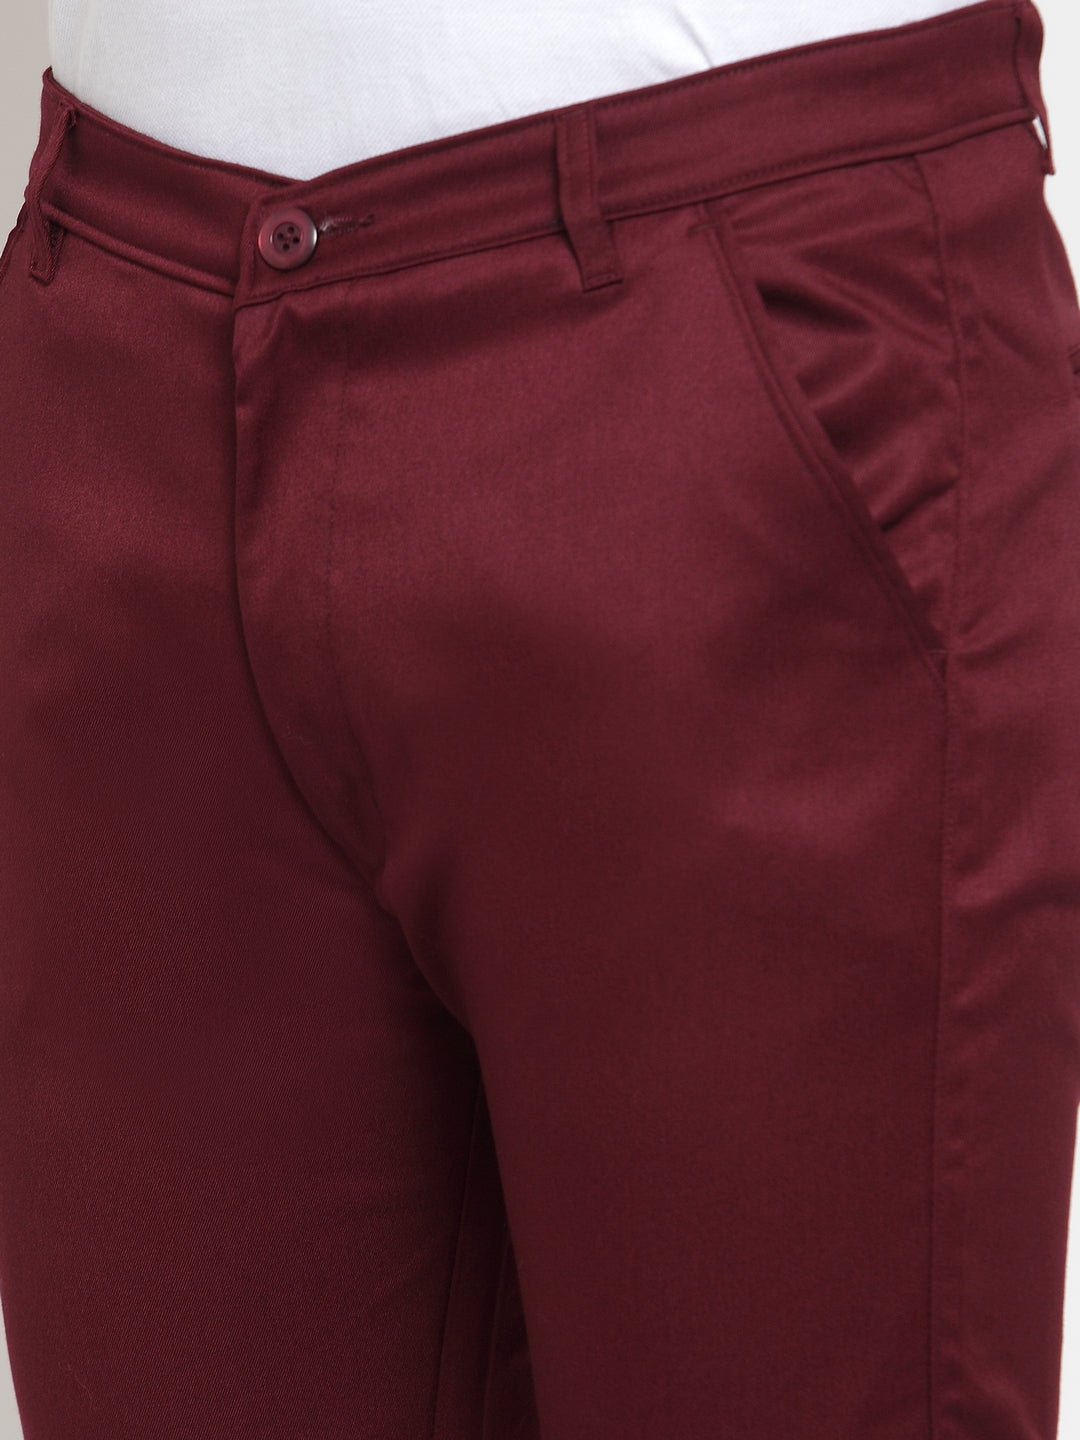 What To Wear With Maroon Pants 10 Options For Men  Murston Co